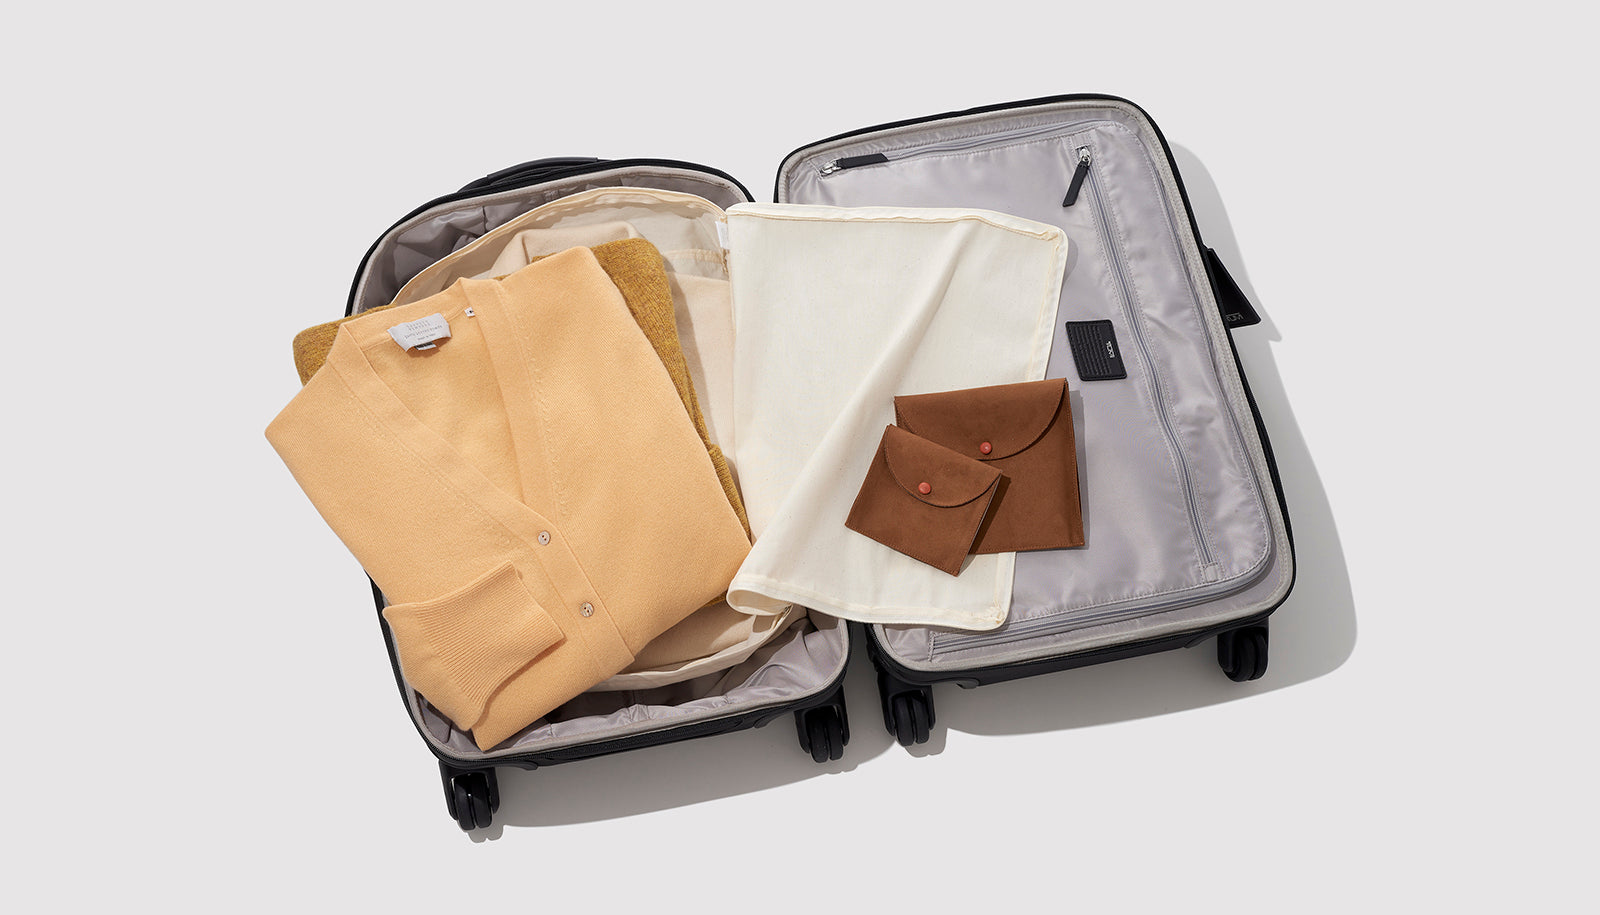 Organize Your Luggage with our Deluxe Cotton Storage Bags